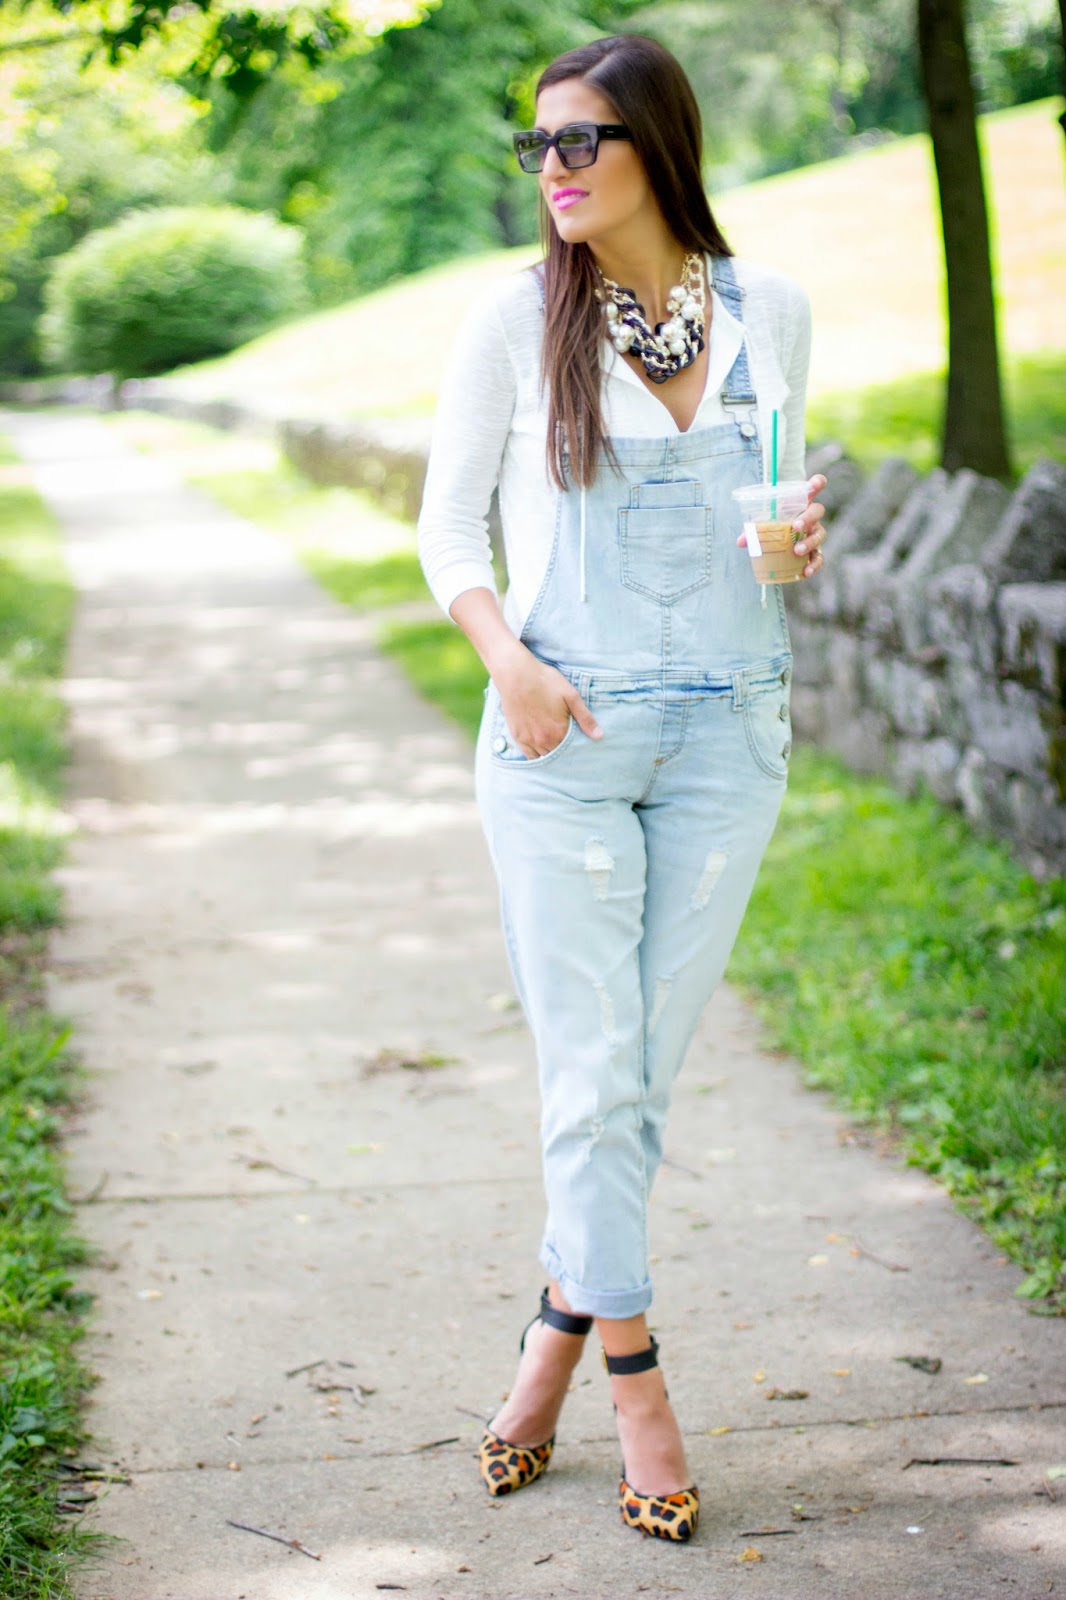 Overalls + Leopard | A Southern Drawl